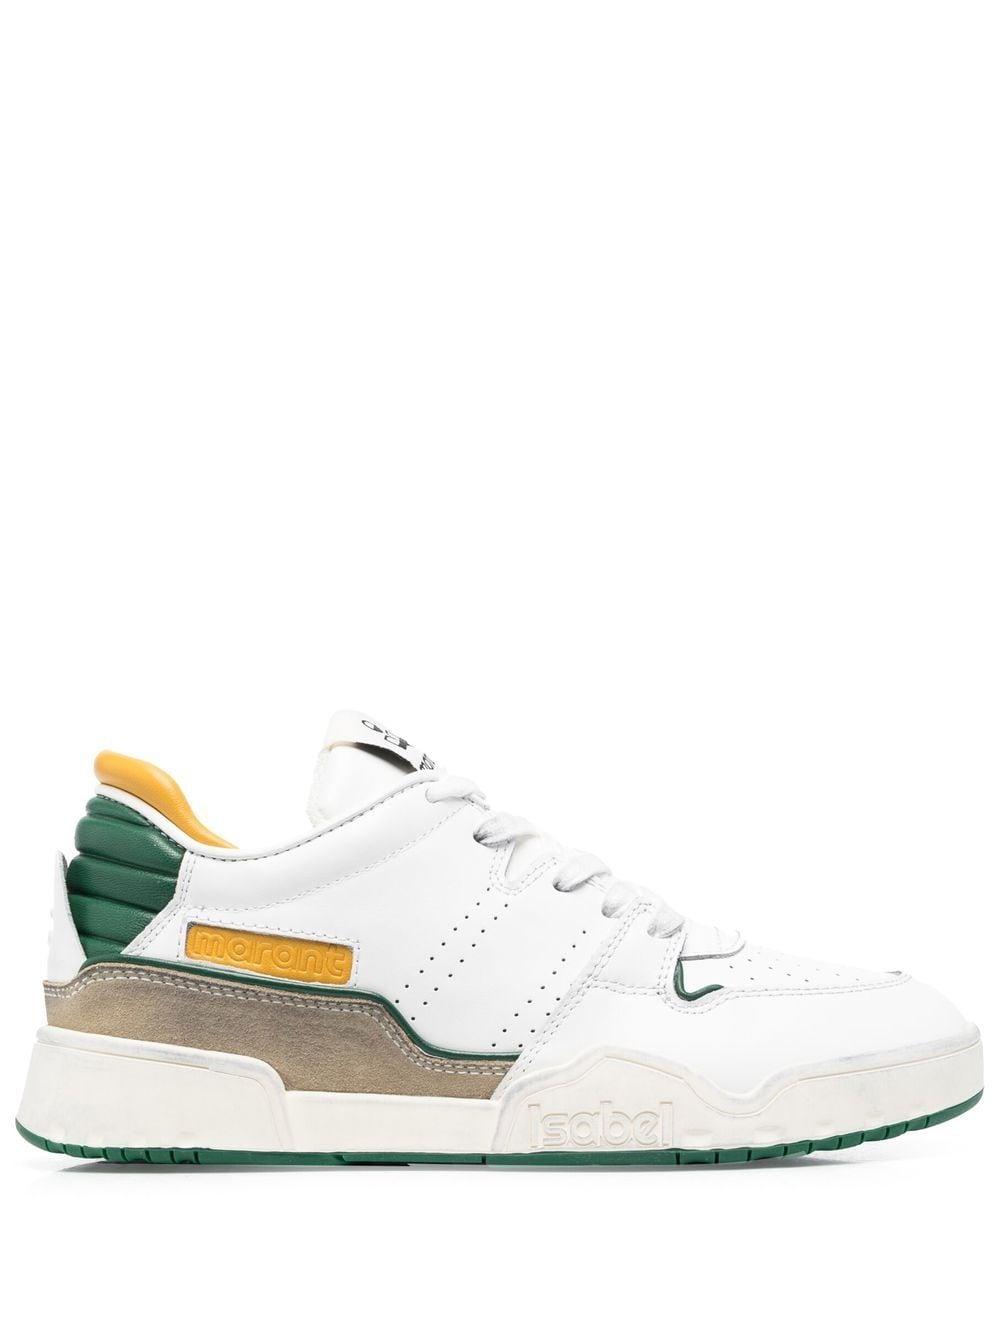 Isabel Marant Emree High-top Sneakers in White | Lyst